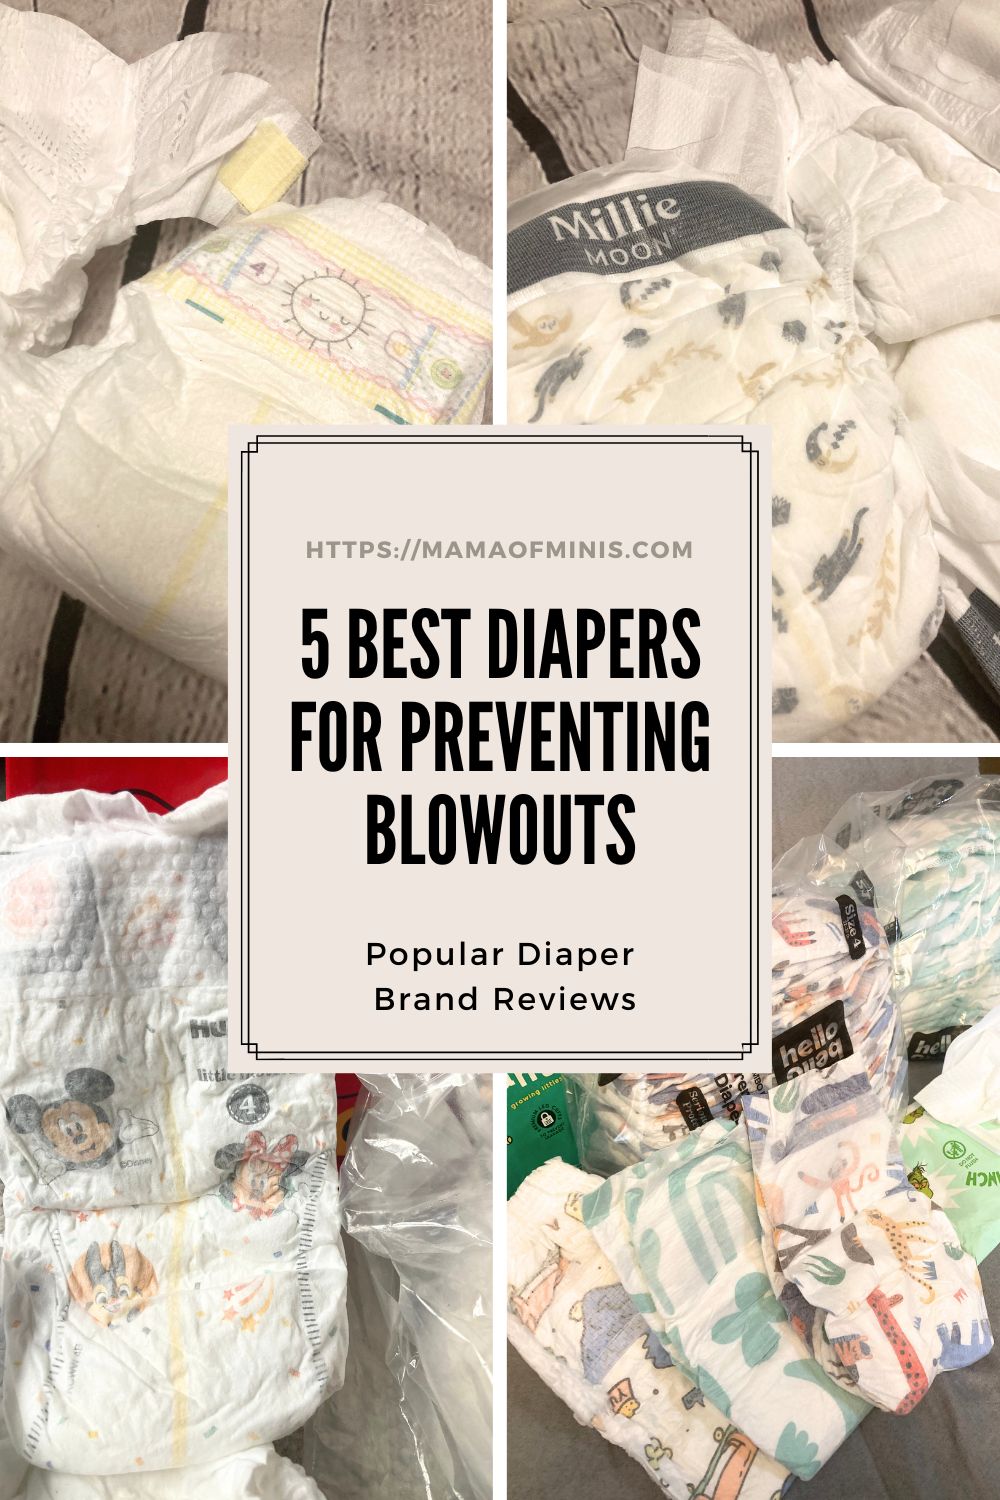 5 Best Diapers for Preventing Blowouts